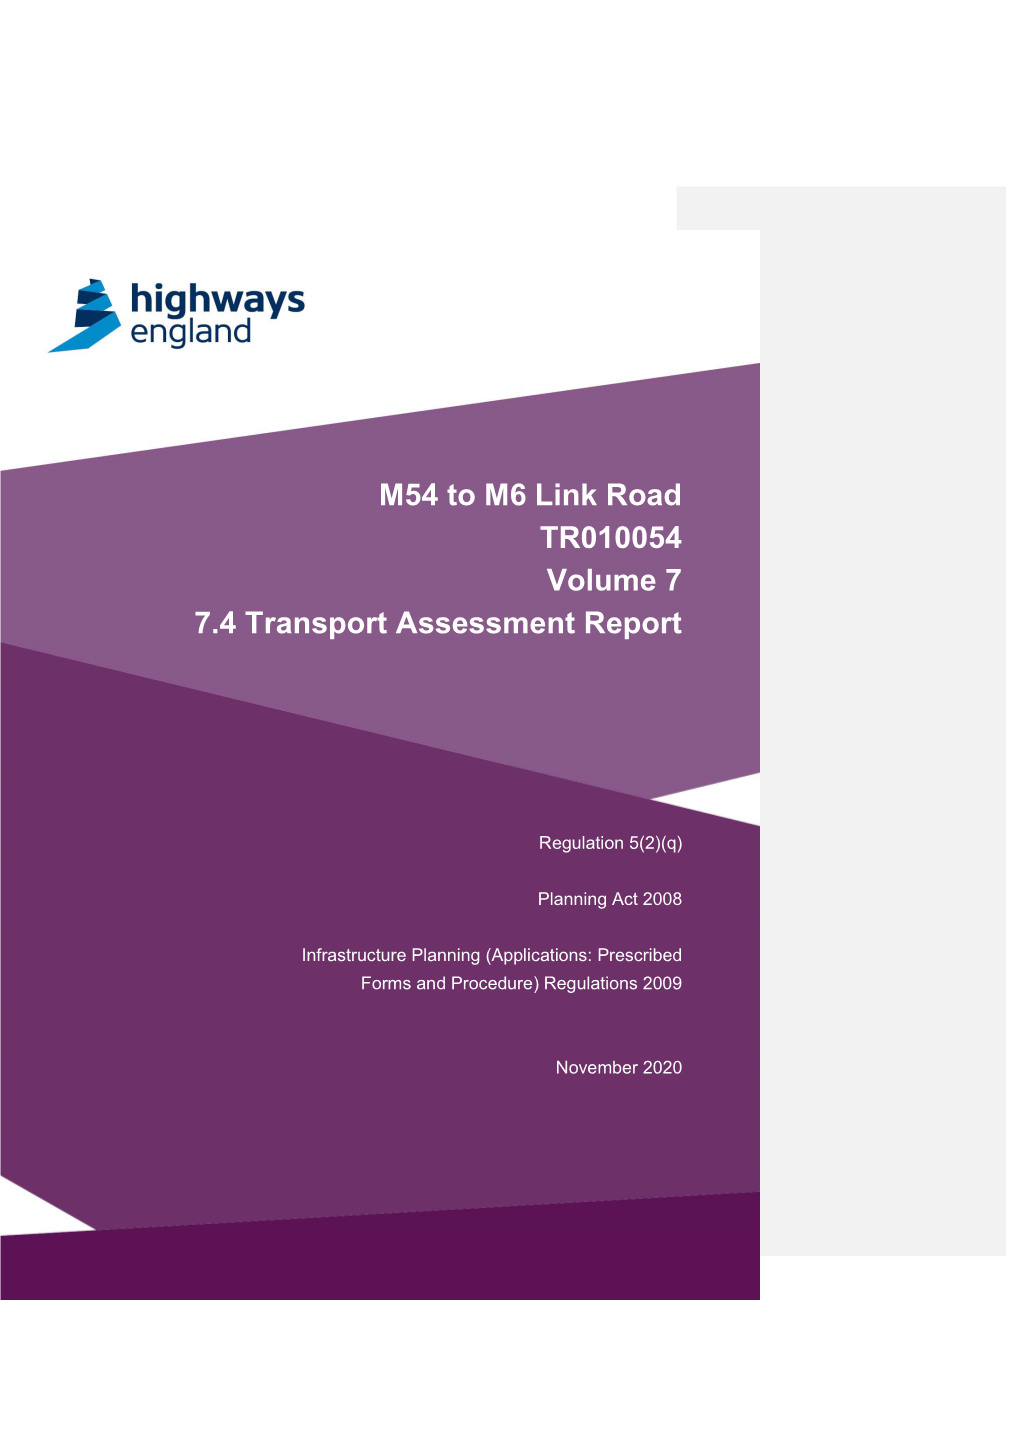 M54 to M6 Link Road TR010054 Volume 7 7.4 Transport Assessment Report